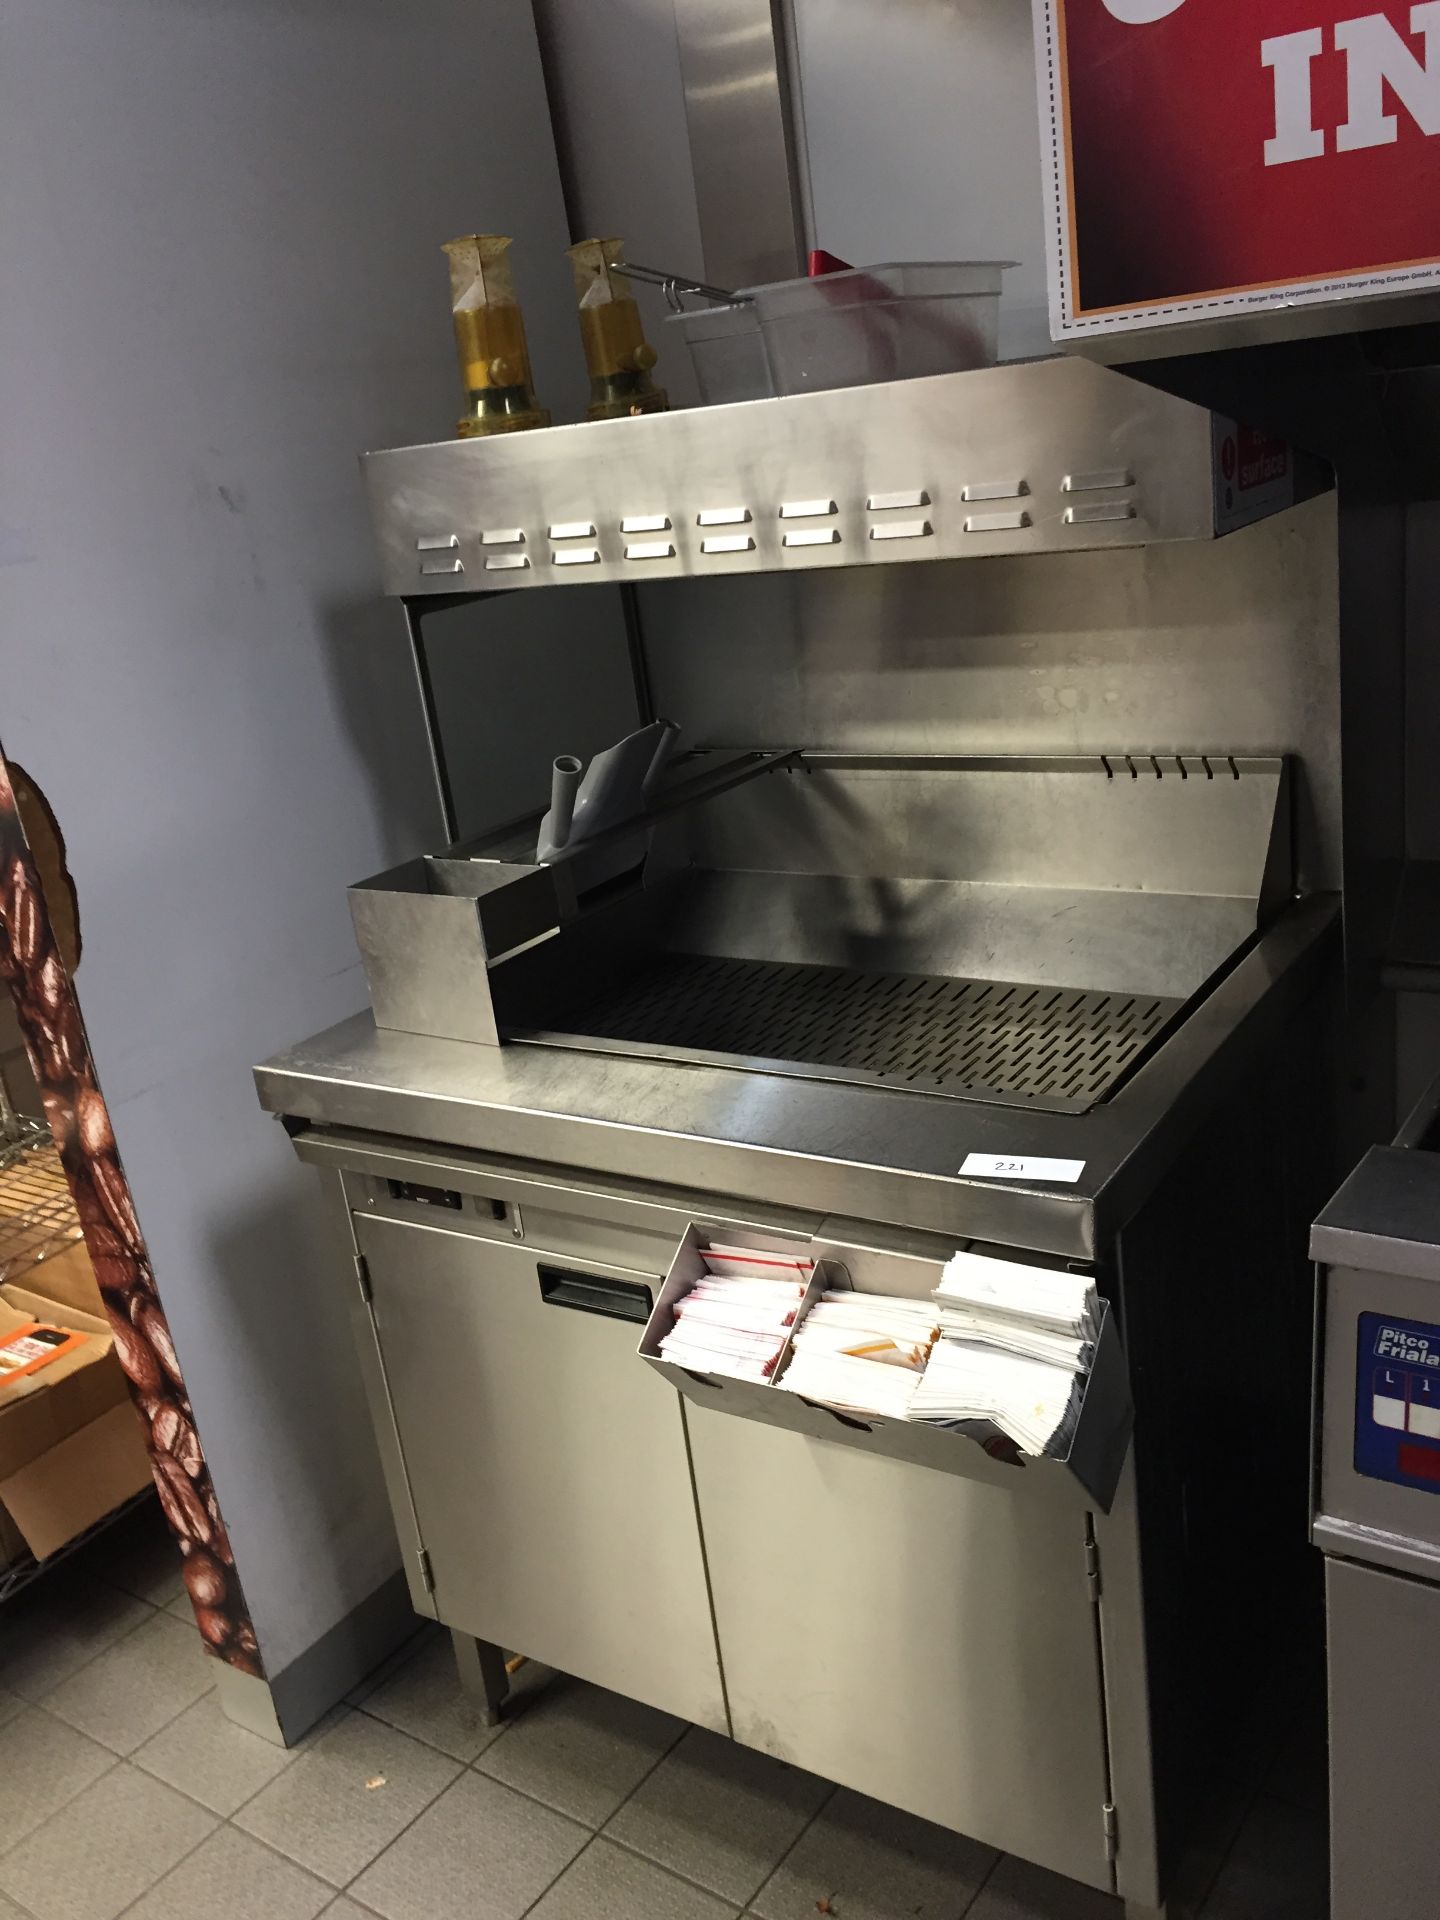 1 x Pitco Frialator Stainless Steel Chips / Fries Warmer - Keeps Fries Warm and Provides a Salter - Image 2 of 5